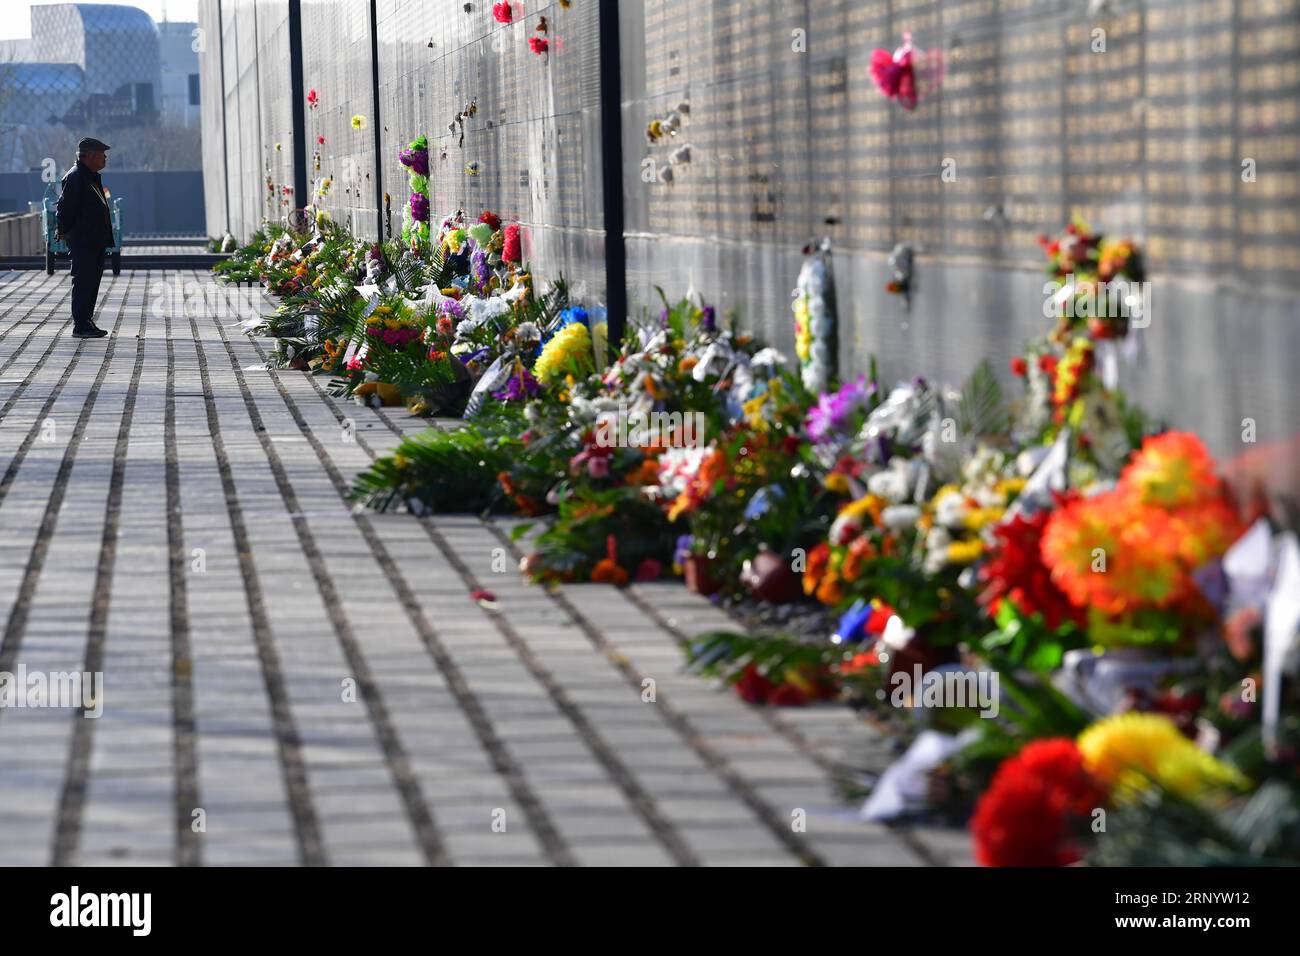 (180404) -- TANGSHAN, April 4, 2018 -- Flower are laid in front of a memorial wall in remembrance of victims in the 1976 Tangshan Earthquake in Tangshan, north China s Hebei Province, April 4, 2018, one day before the Qingming Festival when the deceased are commemorated.) (lmm) CHINA-HEBEI-EARTHQUAKE-VICTIM-REMEMBRANCE (CN) DongxJun PUBLICATIONxNOTxINxCHN Stock Photo